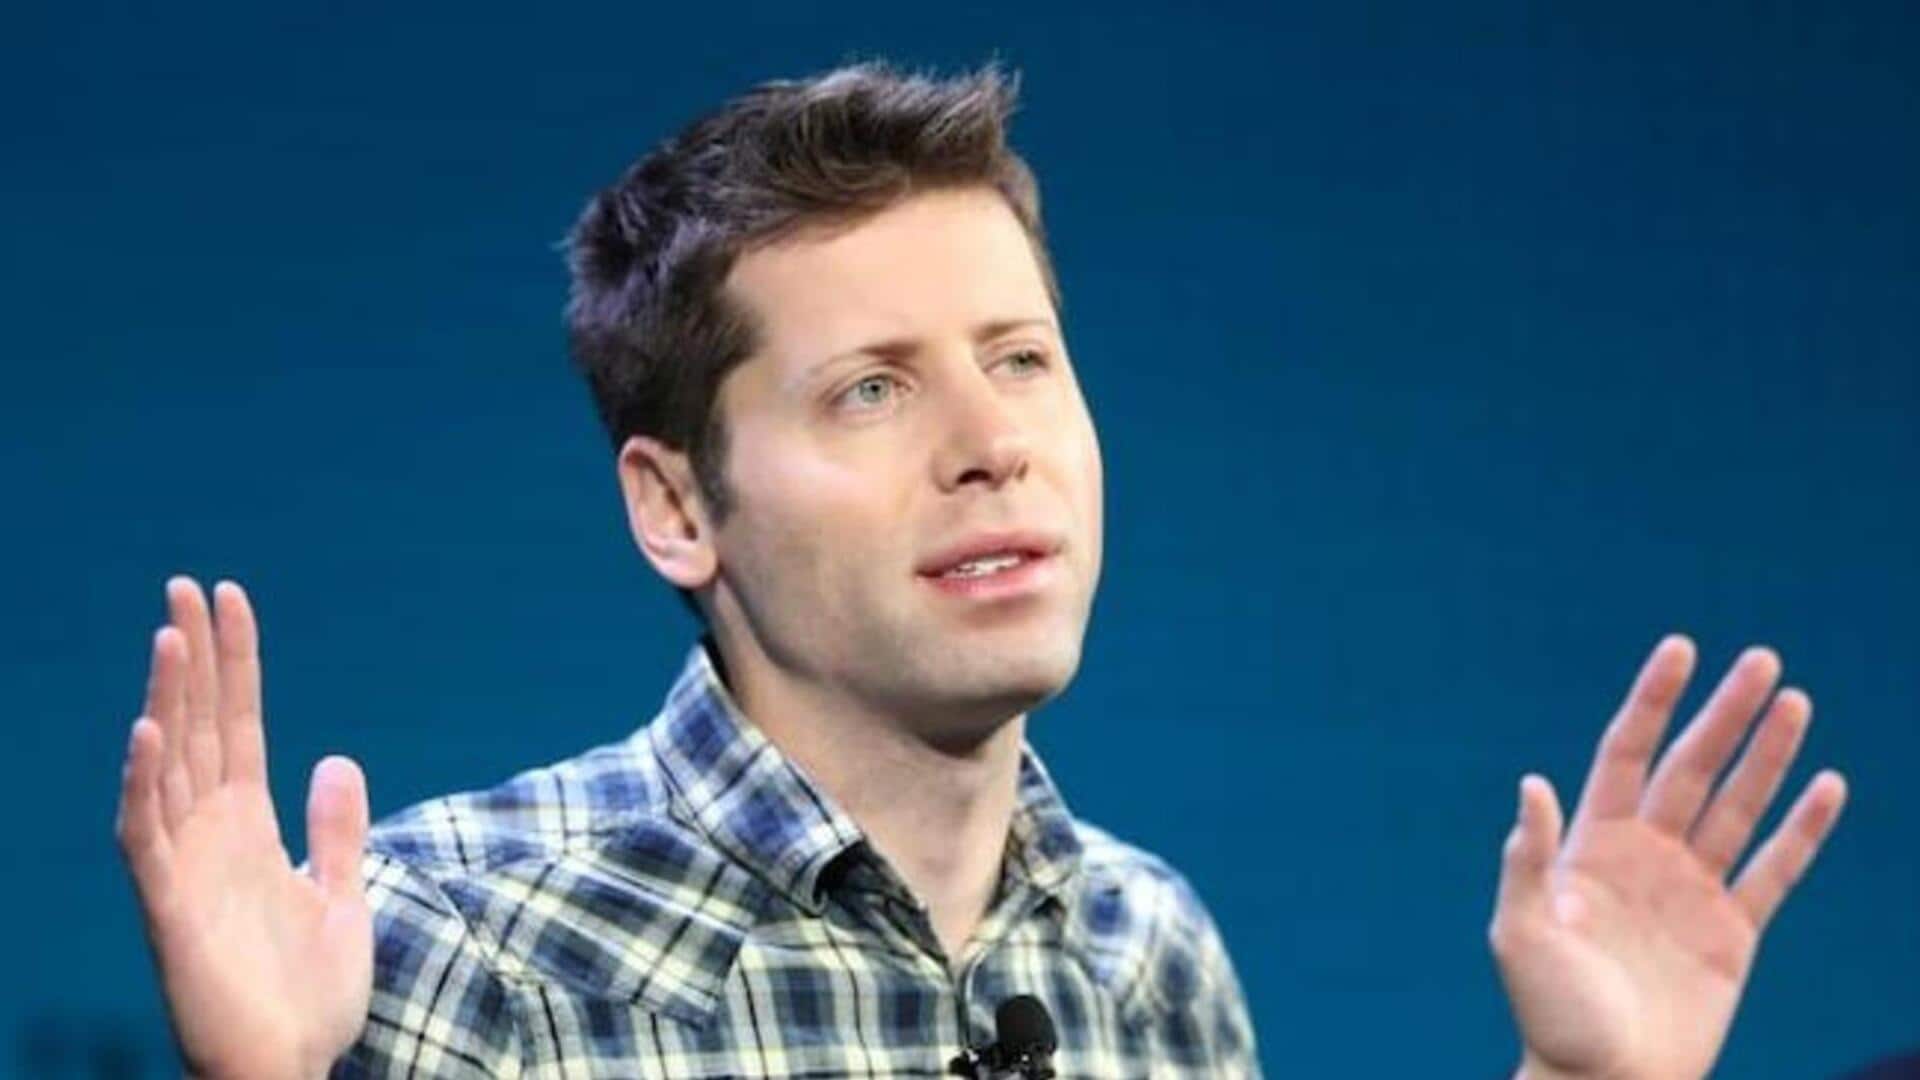 Sam Altman gets Indonesia's first golden visa: What is it